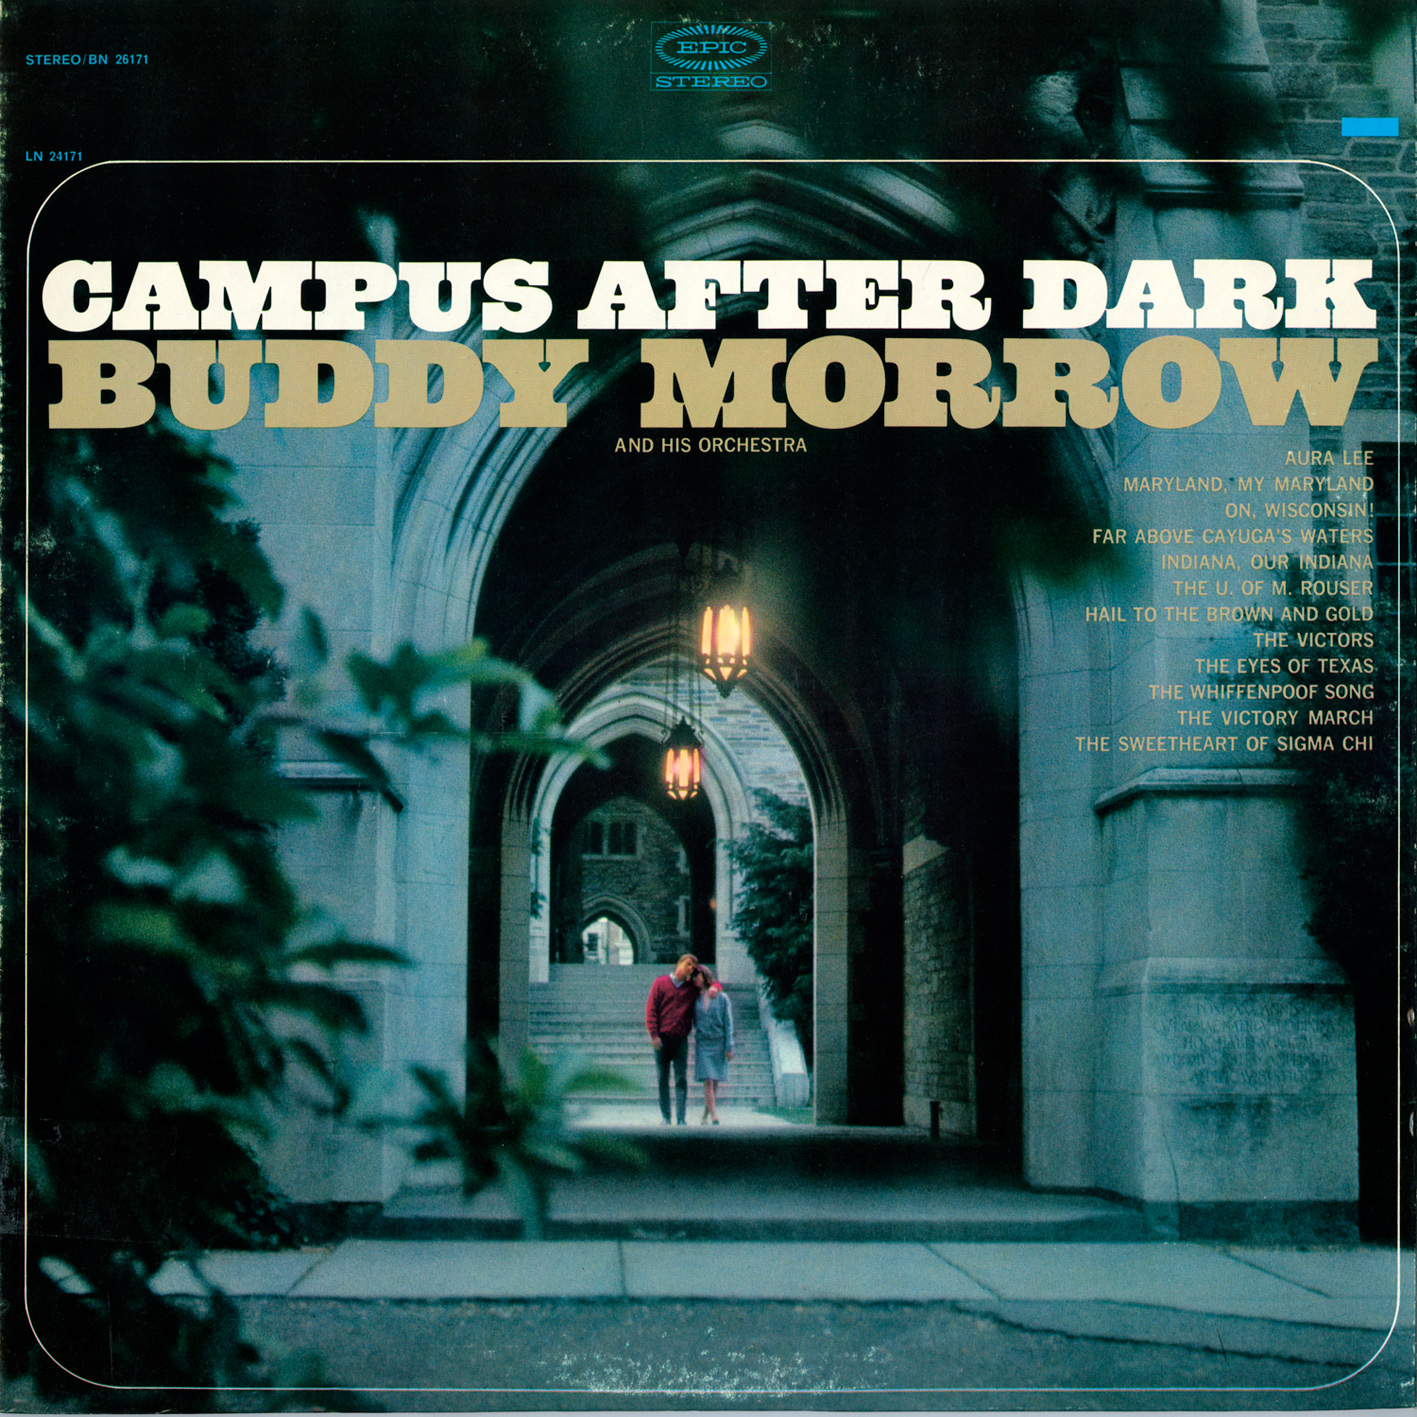 Buddy Morrow and His Orchestra - Campus After Dark (1965/2015) [HDTracks FLAC 24bit/96kHz]